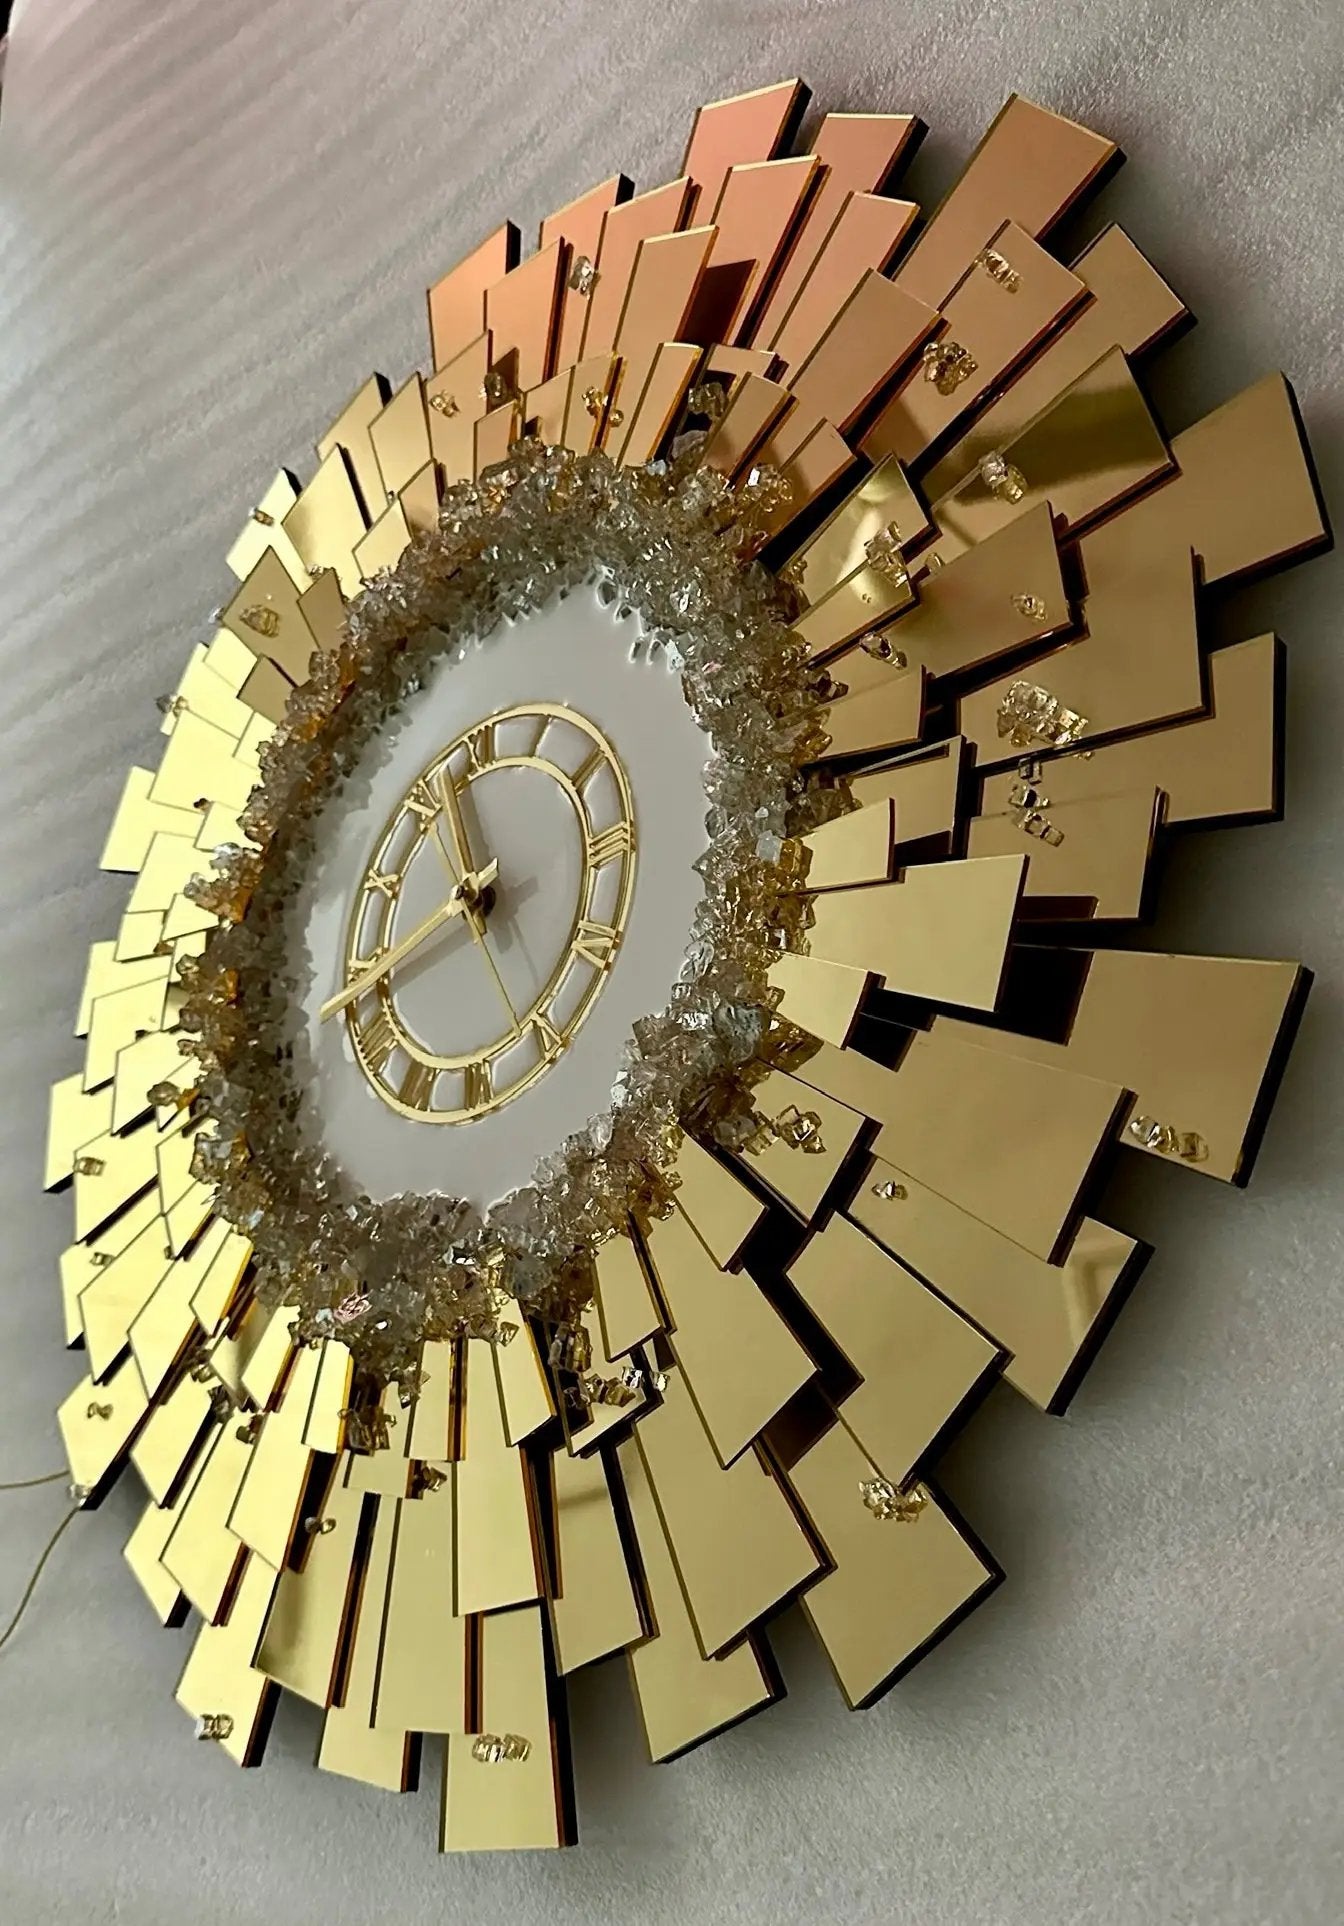 The Wall Clock: A Symphony of Acrylic, Crystals, and Light